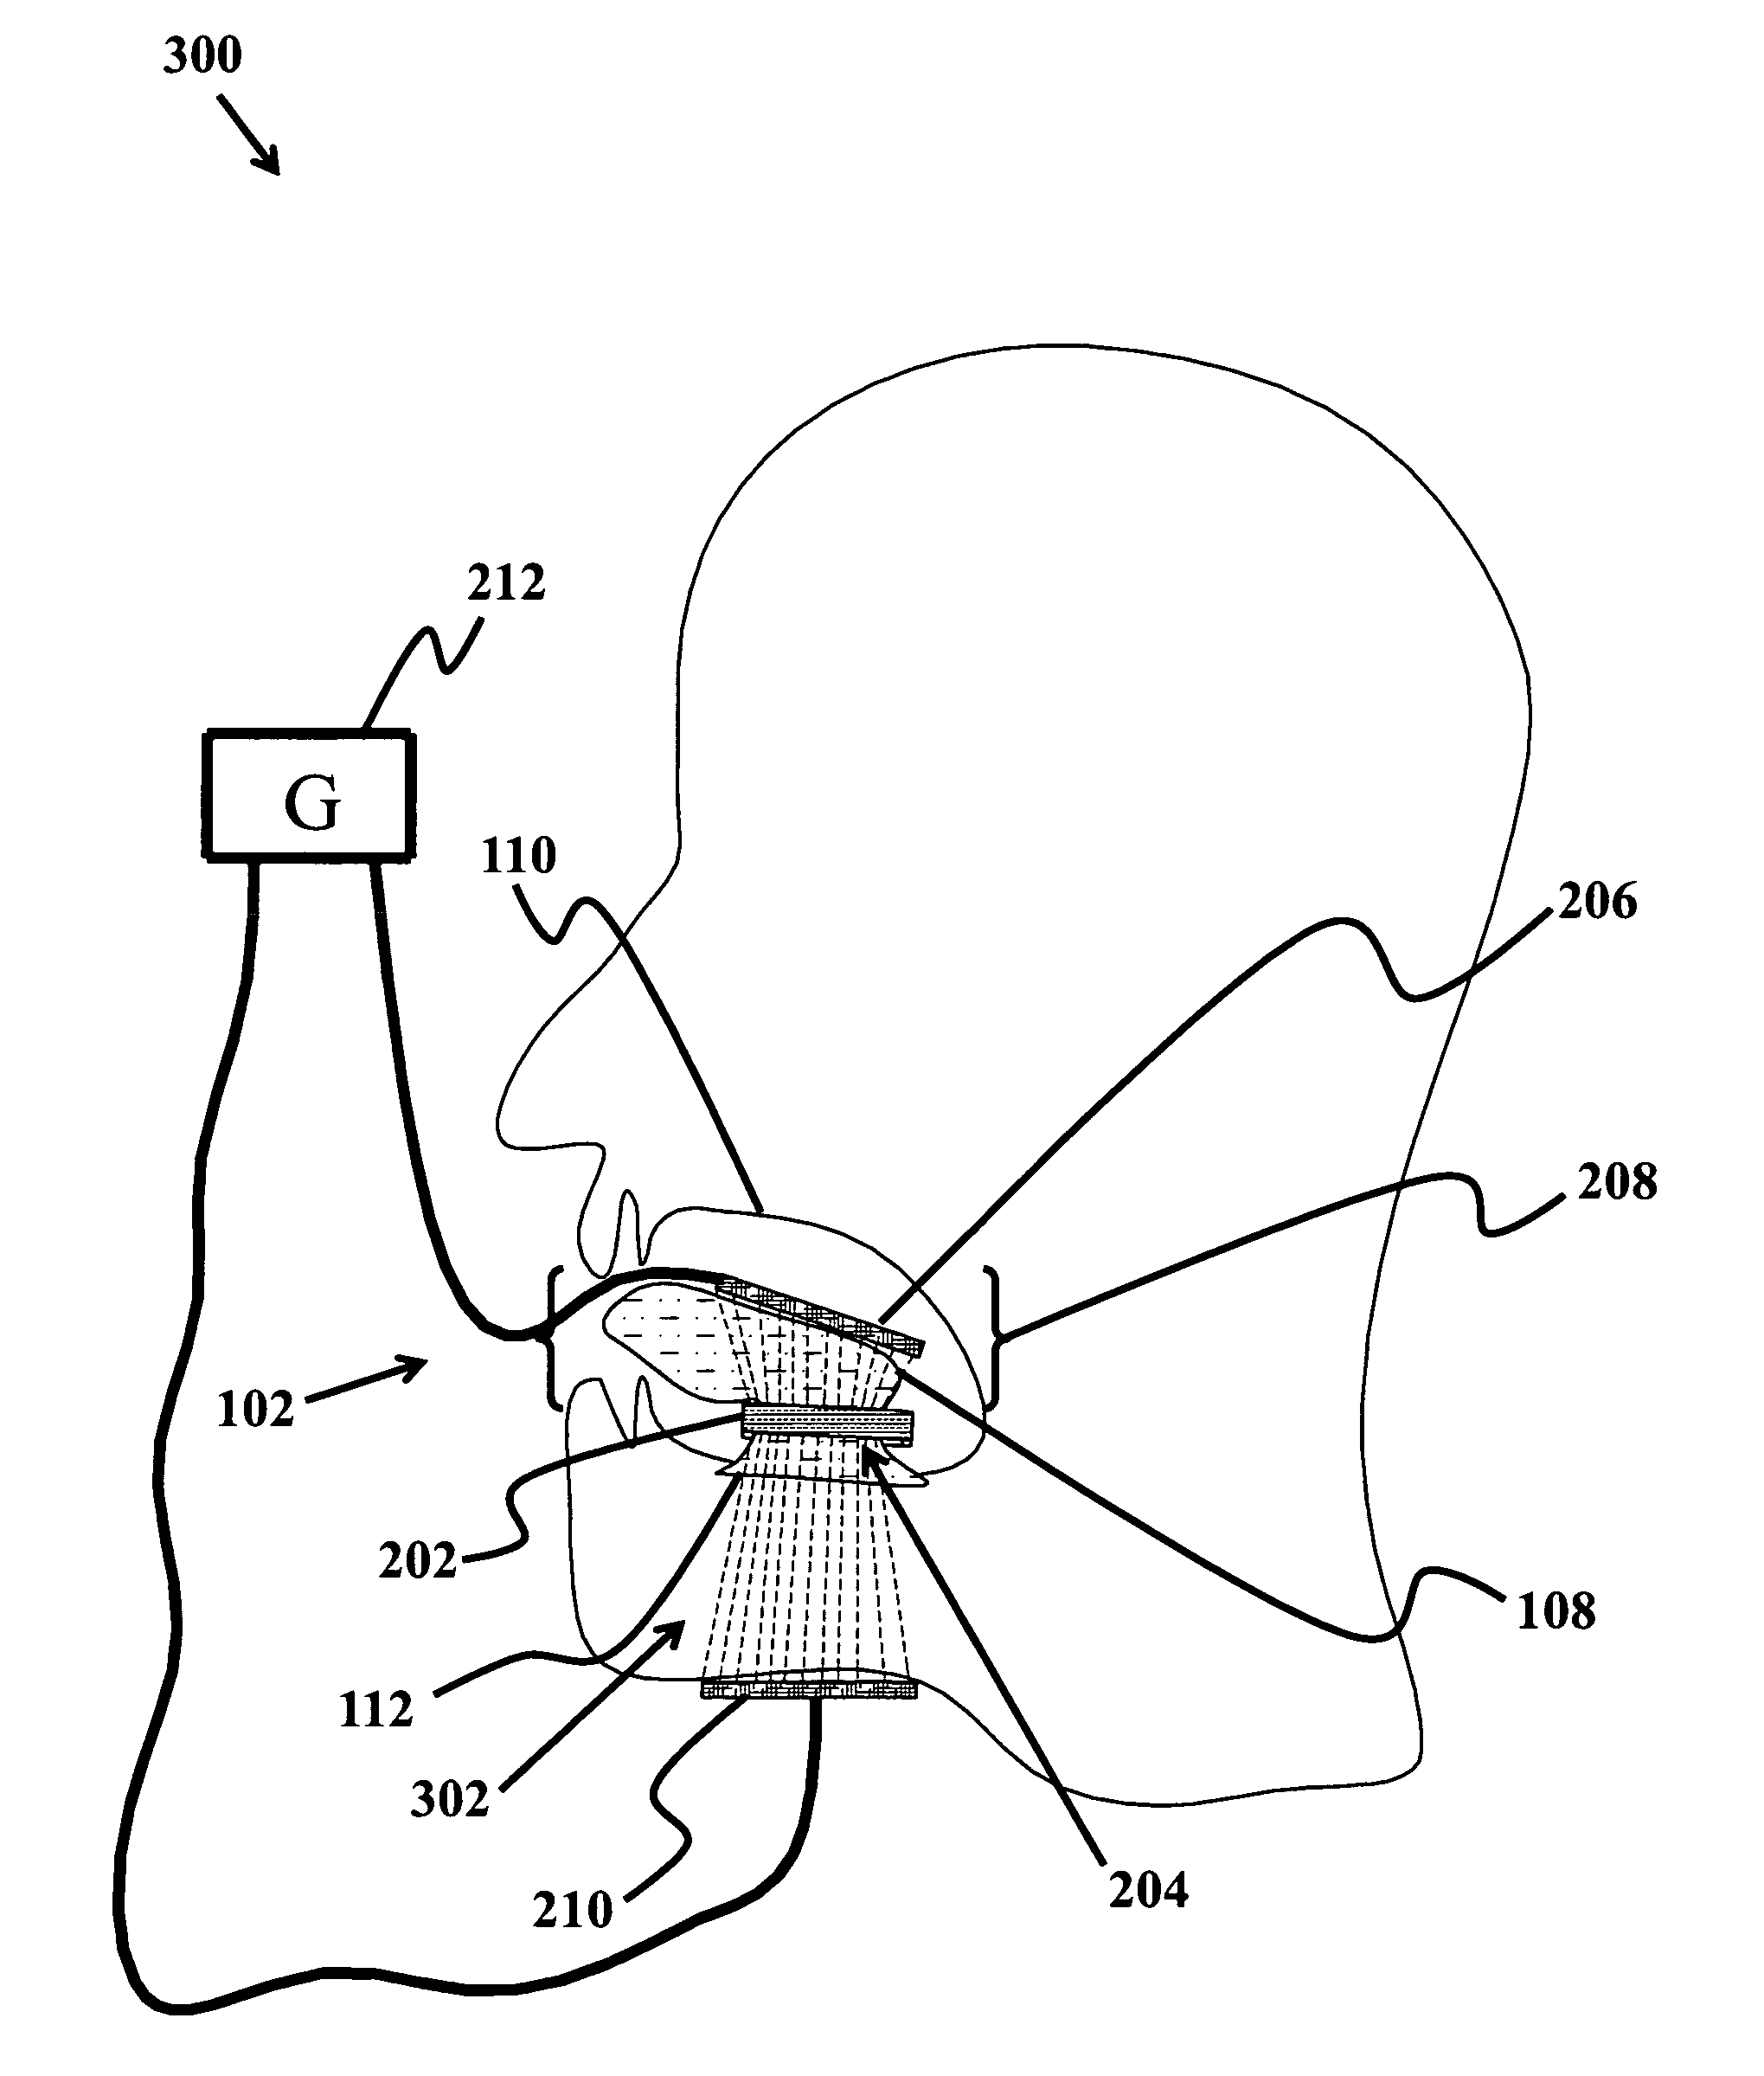 Device and method to treat tissue with electric current